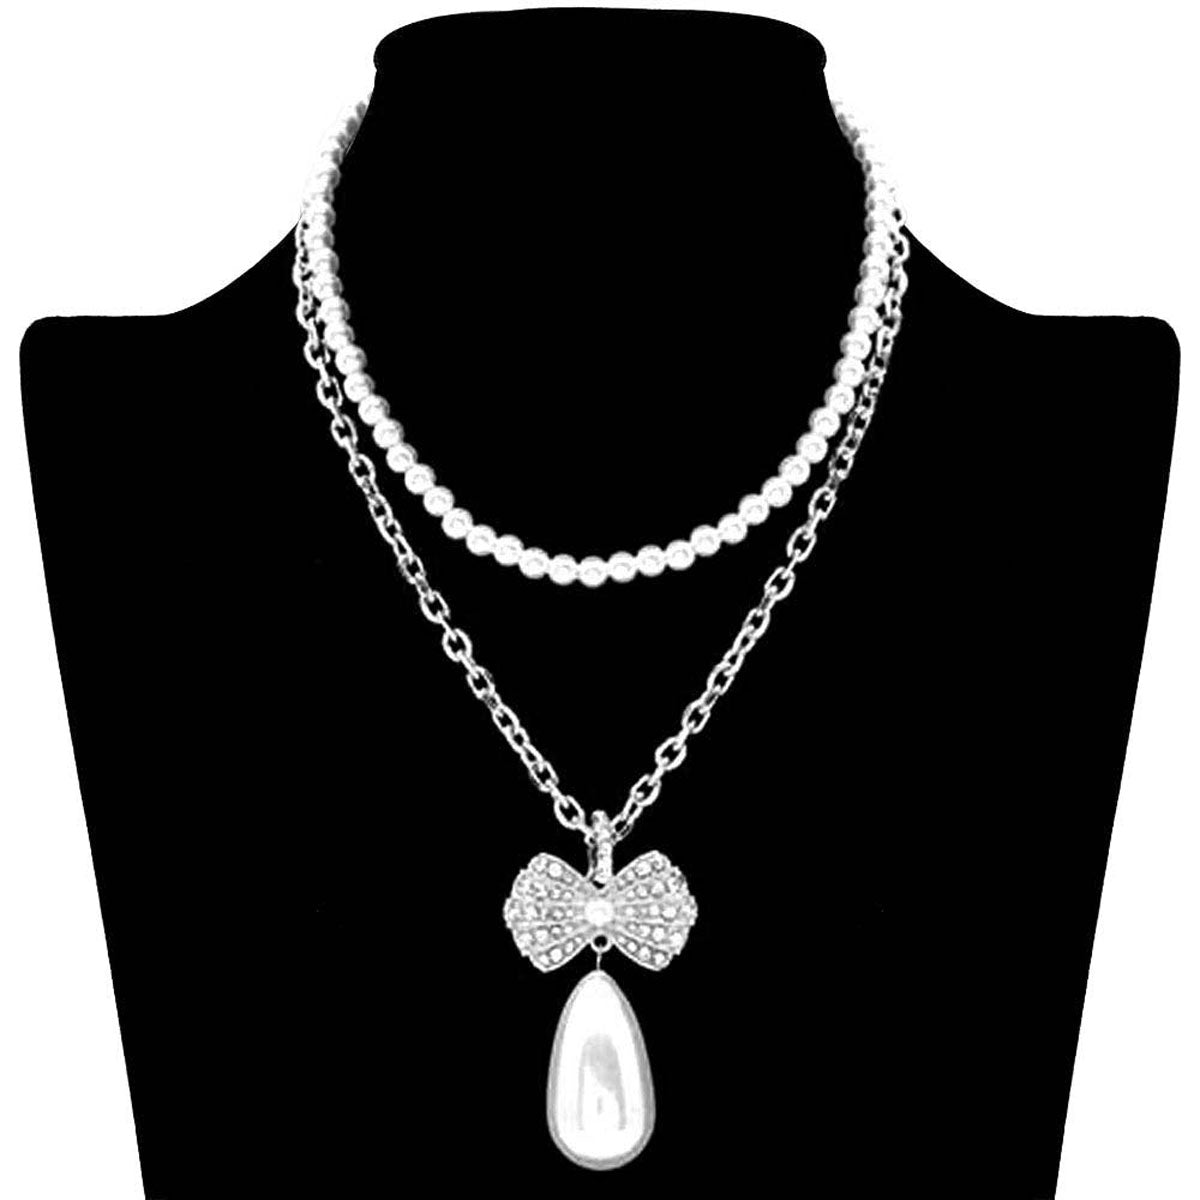 Rhodium Pearl Chain Rhinestone Pave Ribbon Dangle Pendant Necklace, a fashionable and glowing accessory to your outfits. Suitable for most of the outfits that bring compliments. Glowing pearl adds a gorgeous stylish glow to any outfit in style. Jewelry that fits your lifestyle and amps up your confidence! Adds a touch of inspired beauty to your look. Perfect Birthday Gift, Mother's Day Gift, Anniversary Gift, Graduation Gift, Prom Jewelry, Valentine's Day Gift, Thank you, Gift.